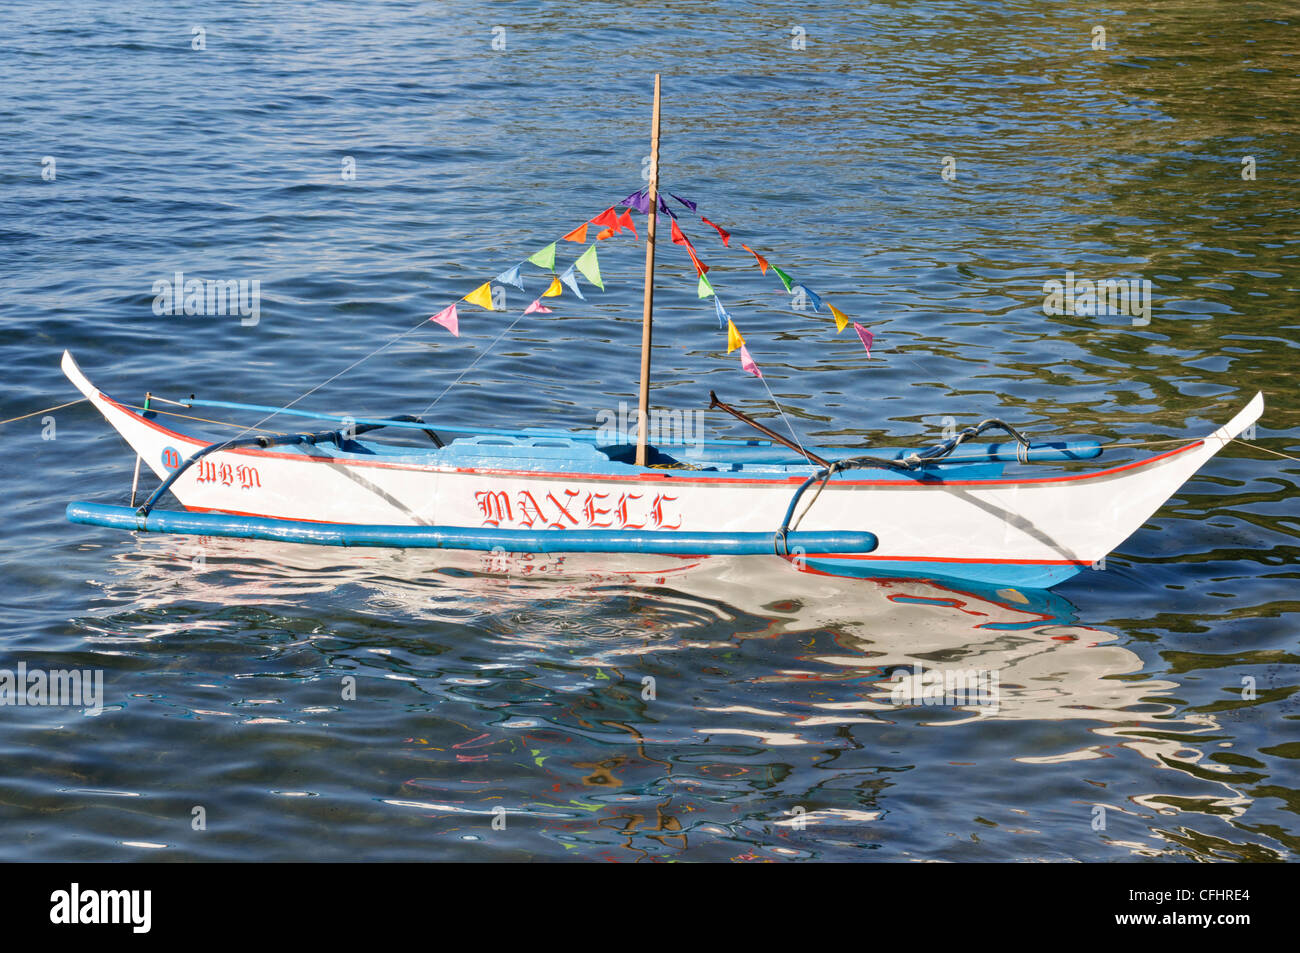 Small Traditional Philippine Outrigger Boat, Banca, Banka, with colorful  flags Stock Photo - Alamy